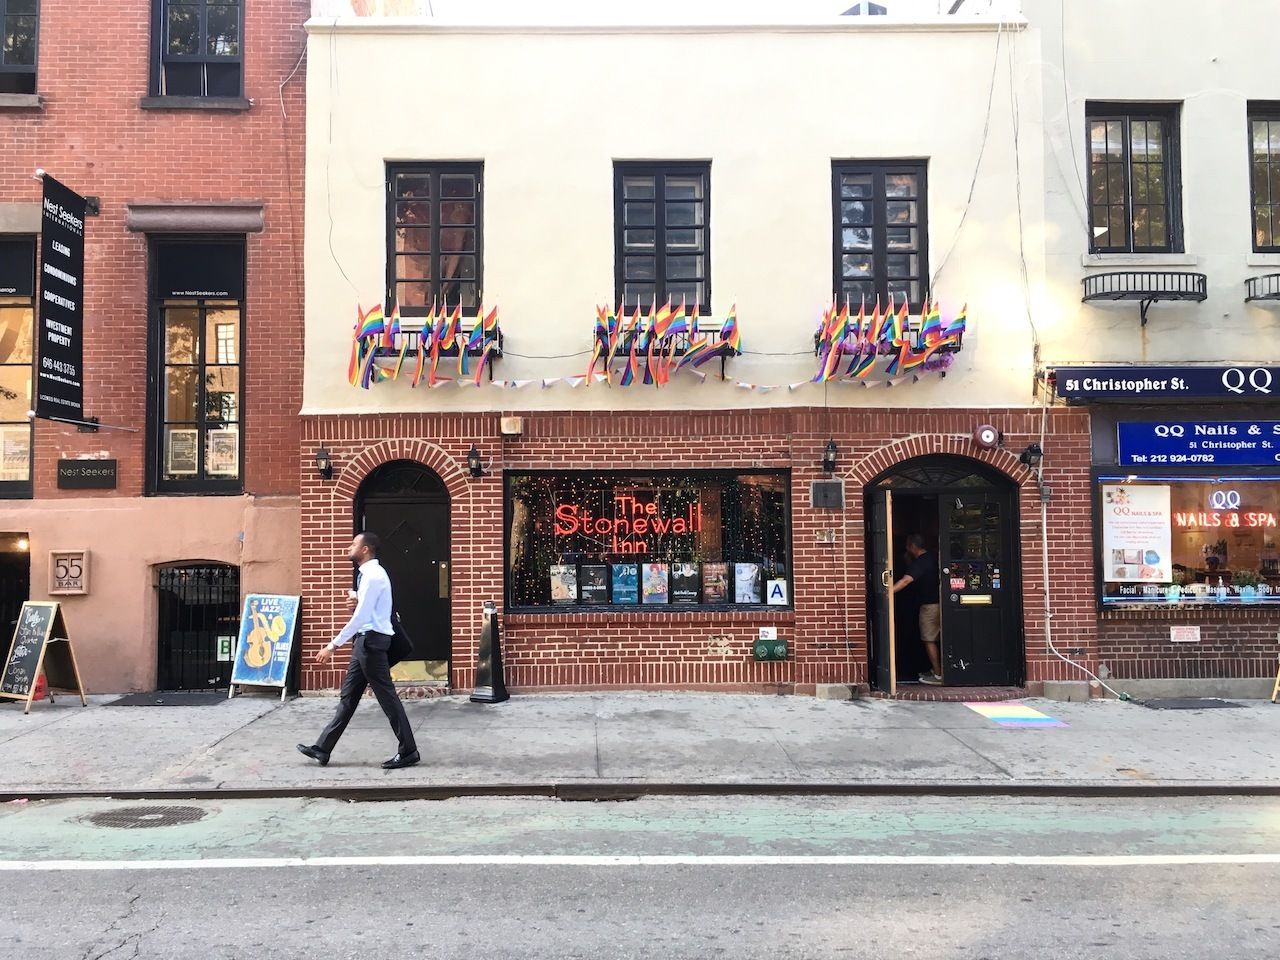 NEW YORK CITY - 12 JULY 2016: A businessman walks in front of the Stonewall Inn on Christopher Street, the location of the Stonewall riots and the birth of the gay rights movement., LGBTQ safe spaces US